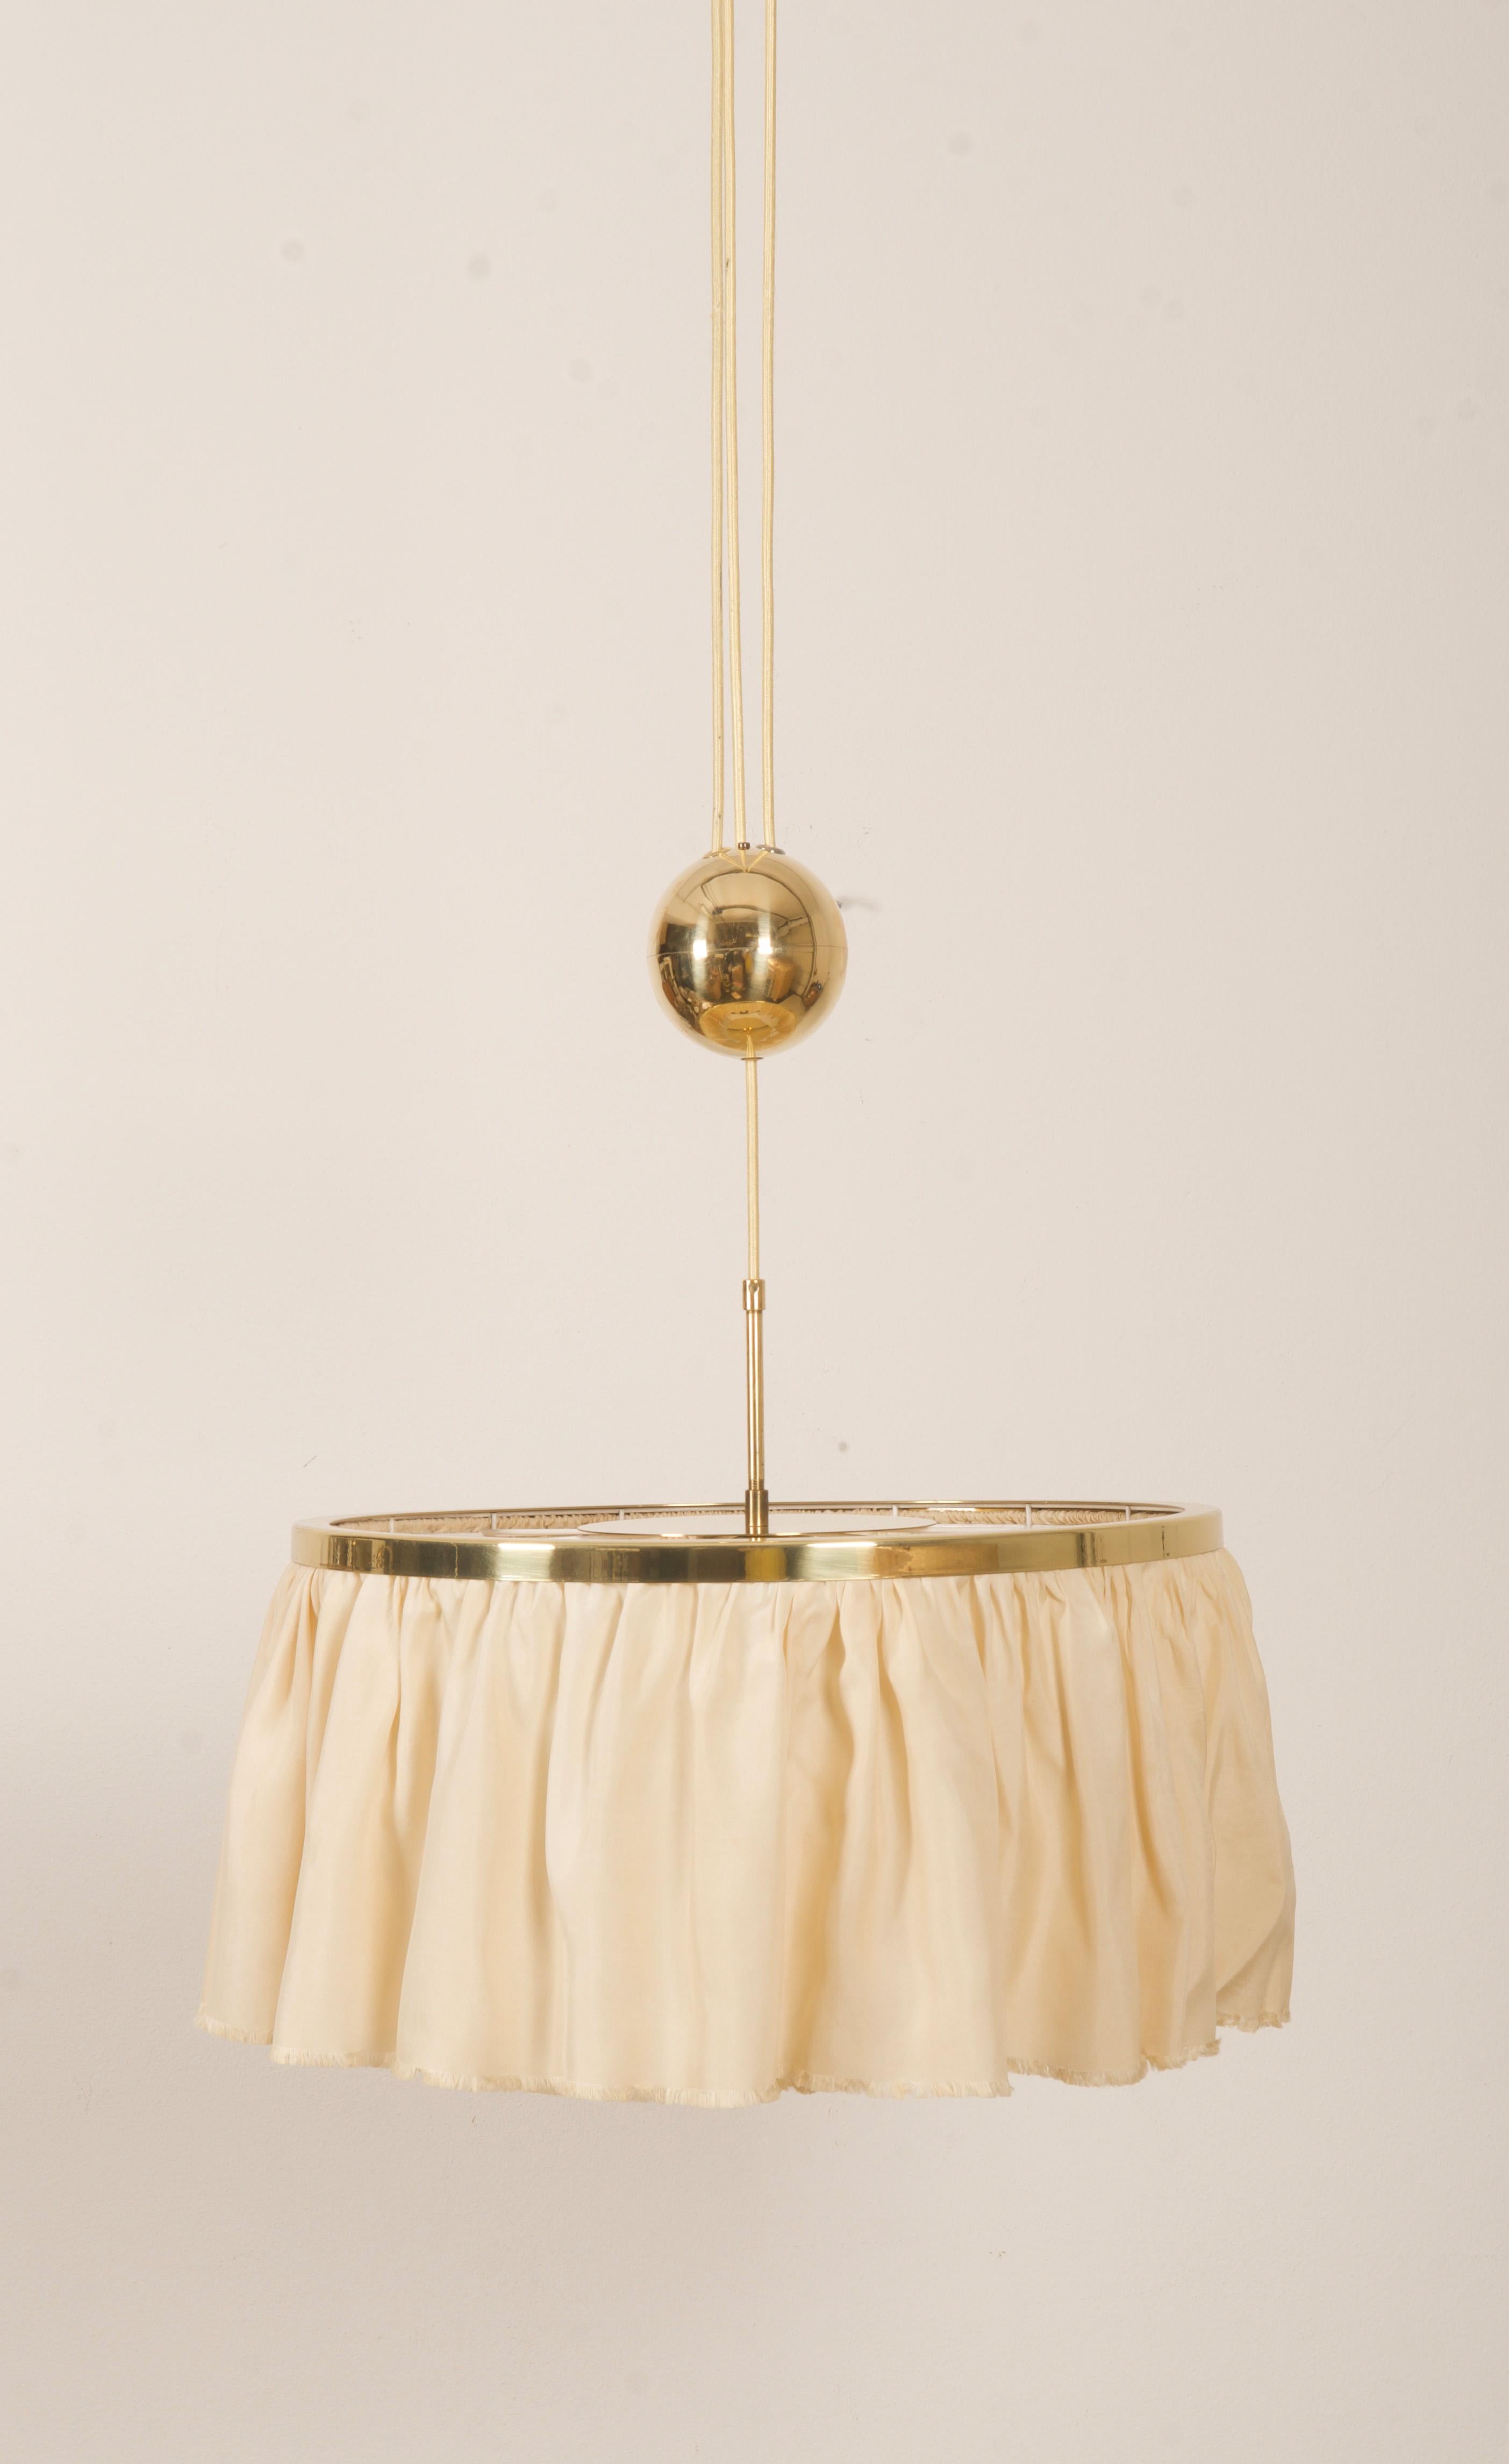 Vienna Secession Counterweight Silk Pendant Light by J.T. Kalmar Designed by Adolf Loos